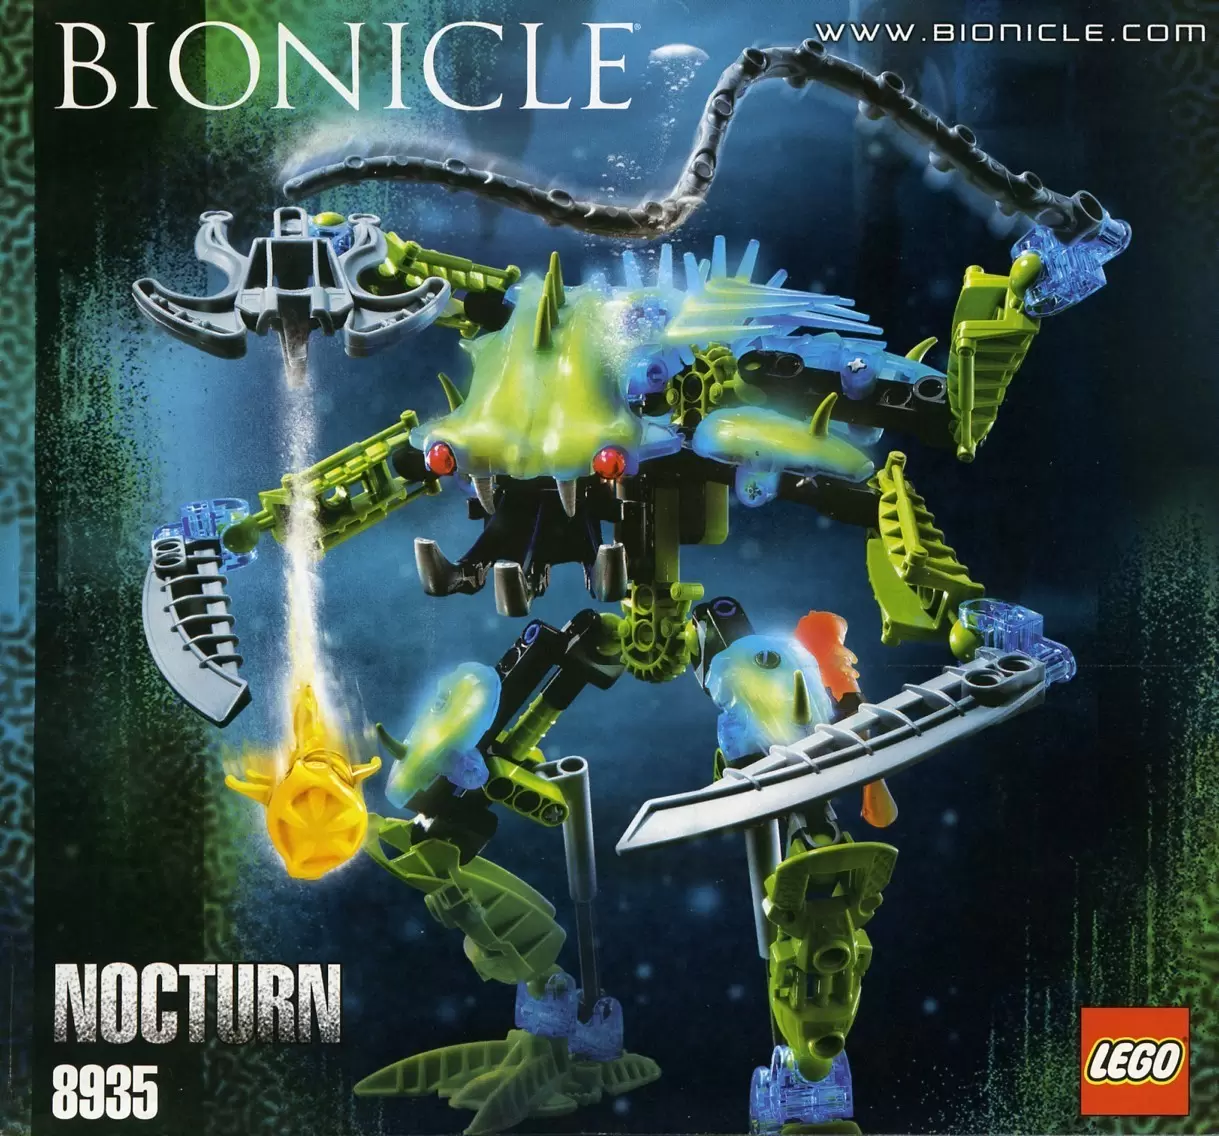 LEGO Bionicle - Nocturn